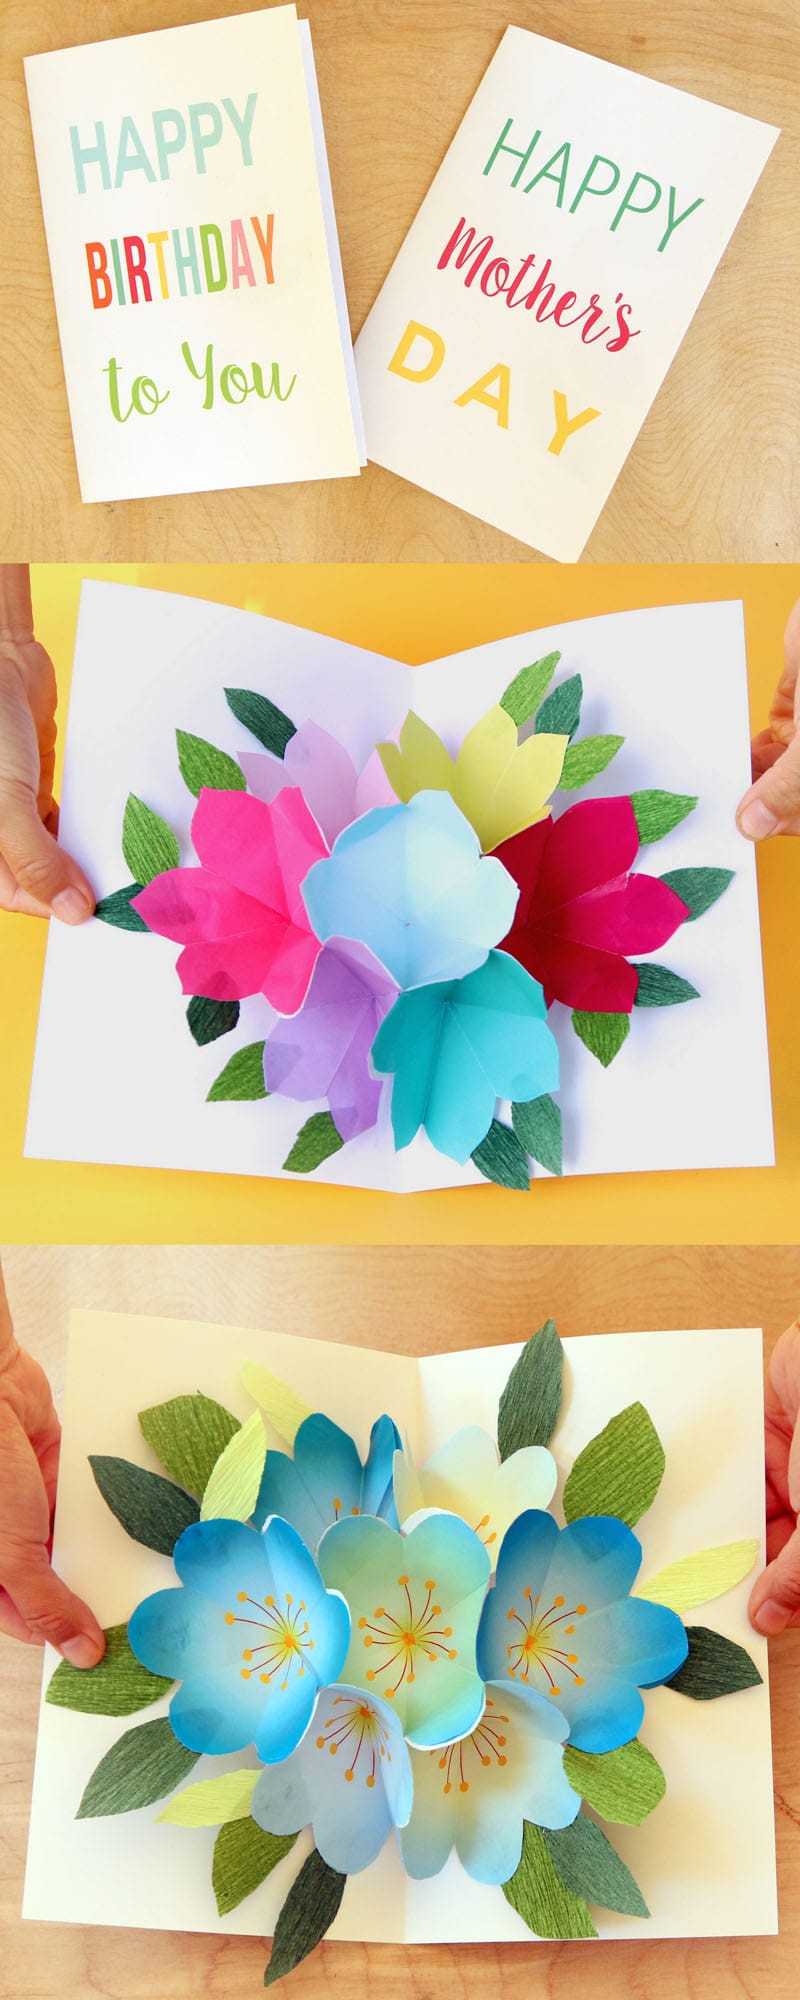 Free Printable Happy Birthday Card With Pop Up Bouquet – A With Happy Birthday Pop Up Card Free Template